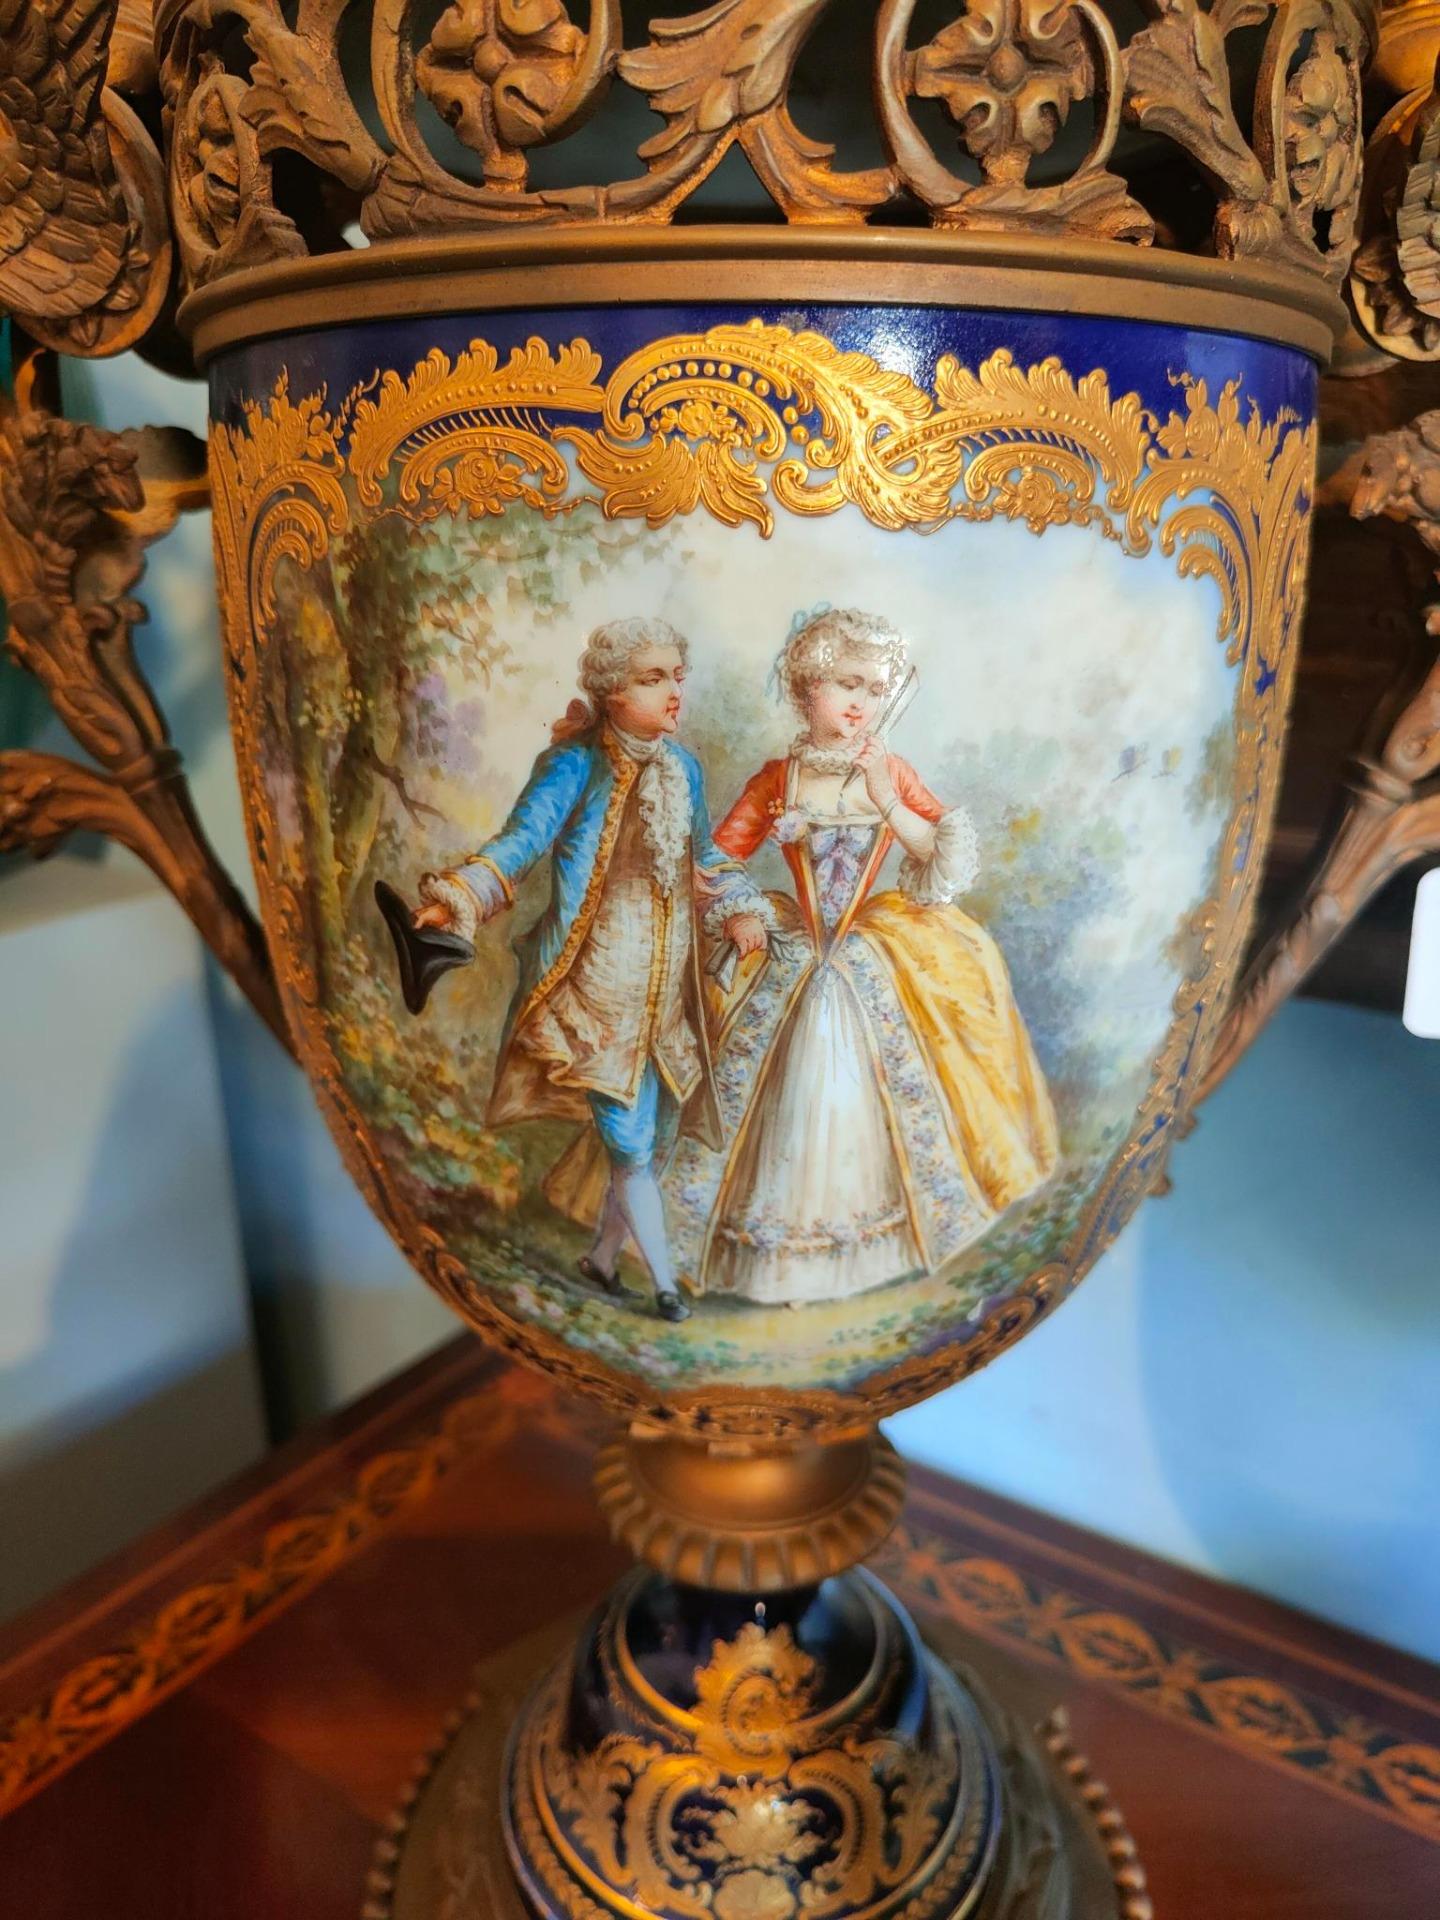 Period: Second half of the 19th century.
Large and important pair of Sèvres Porcelain vases.
Large and important pair of mounted Sèvres Porcelain vases with rich gilt bronze decoration.
The two handles are in bronze and represent female